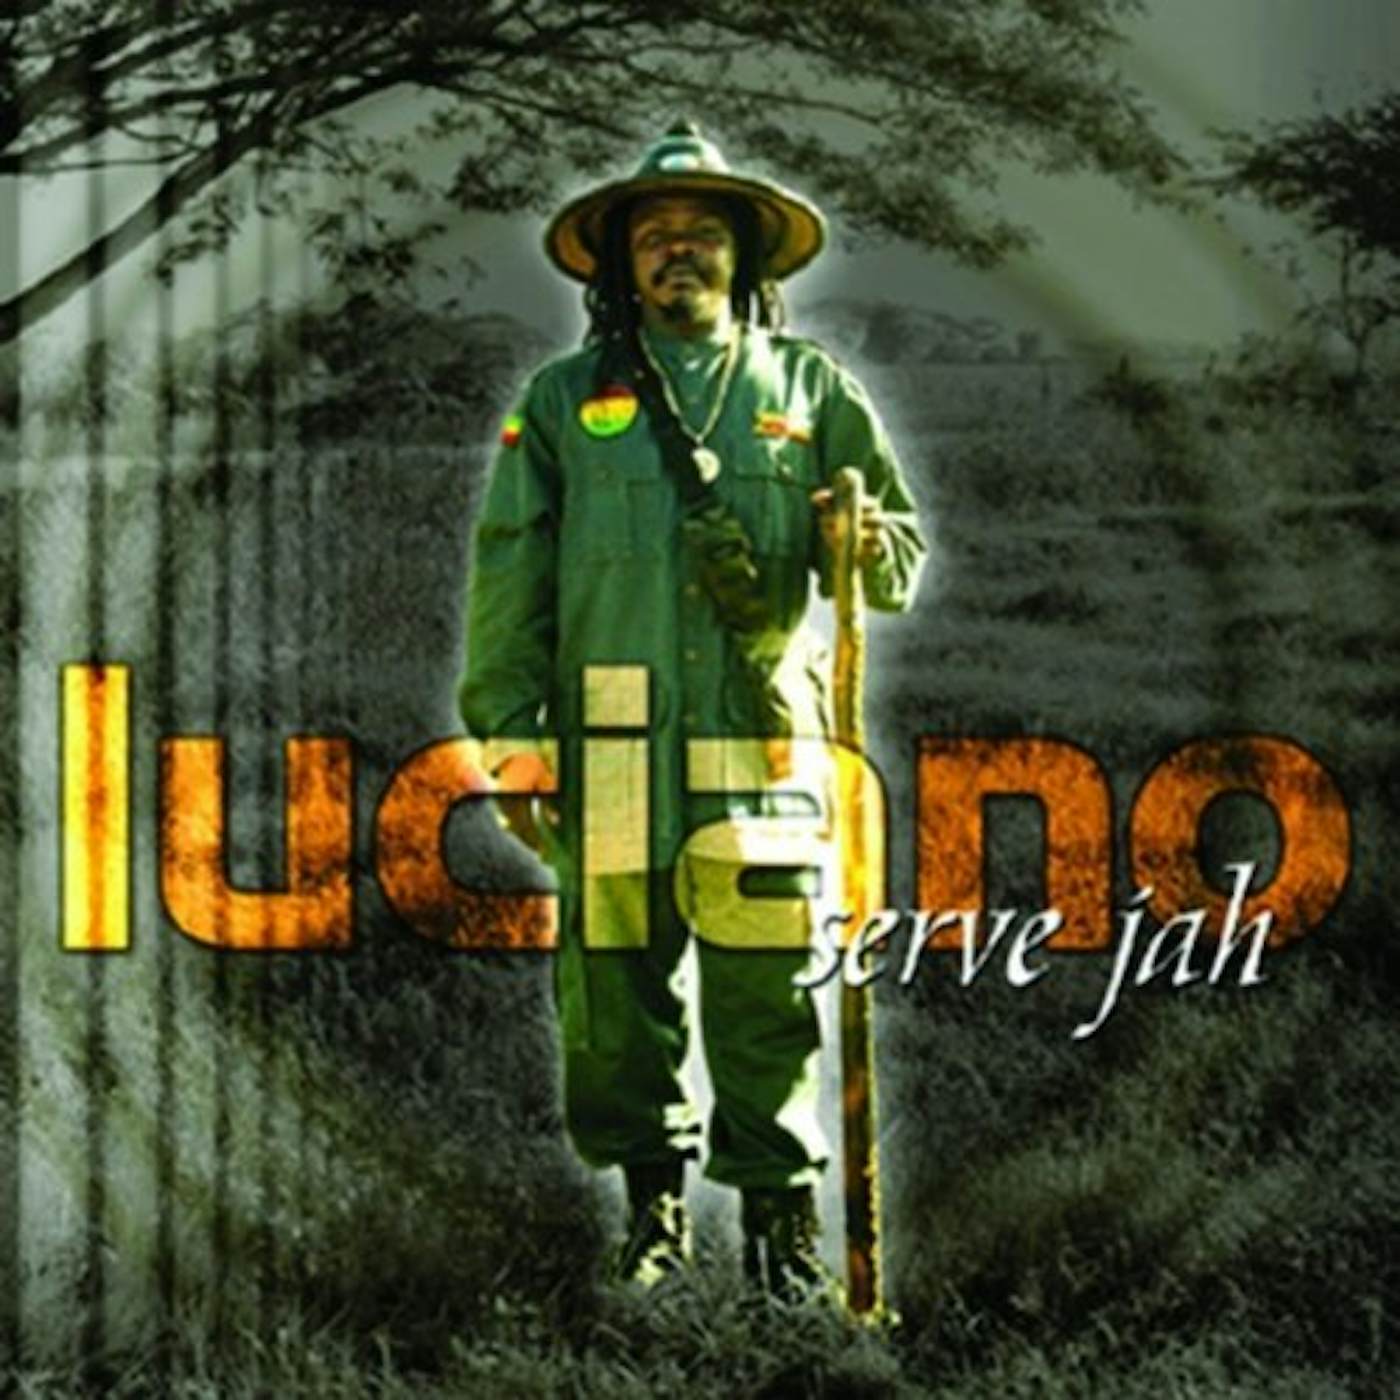 Luciano SERVE JAH CD